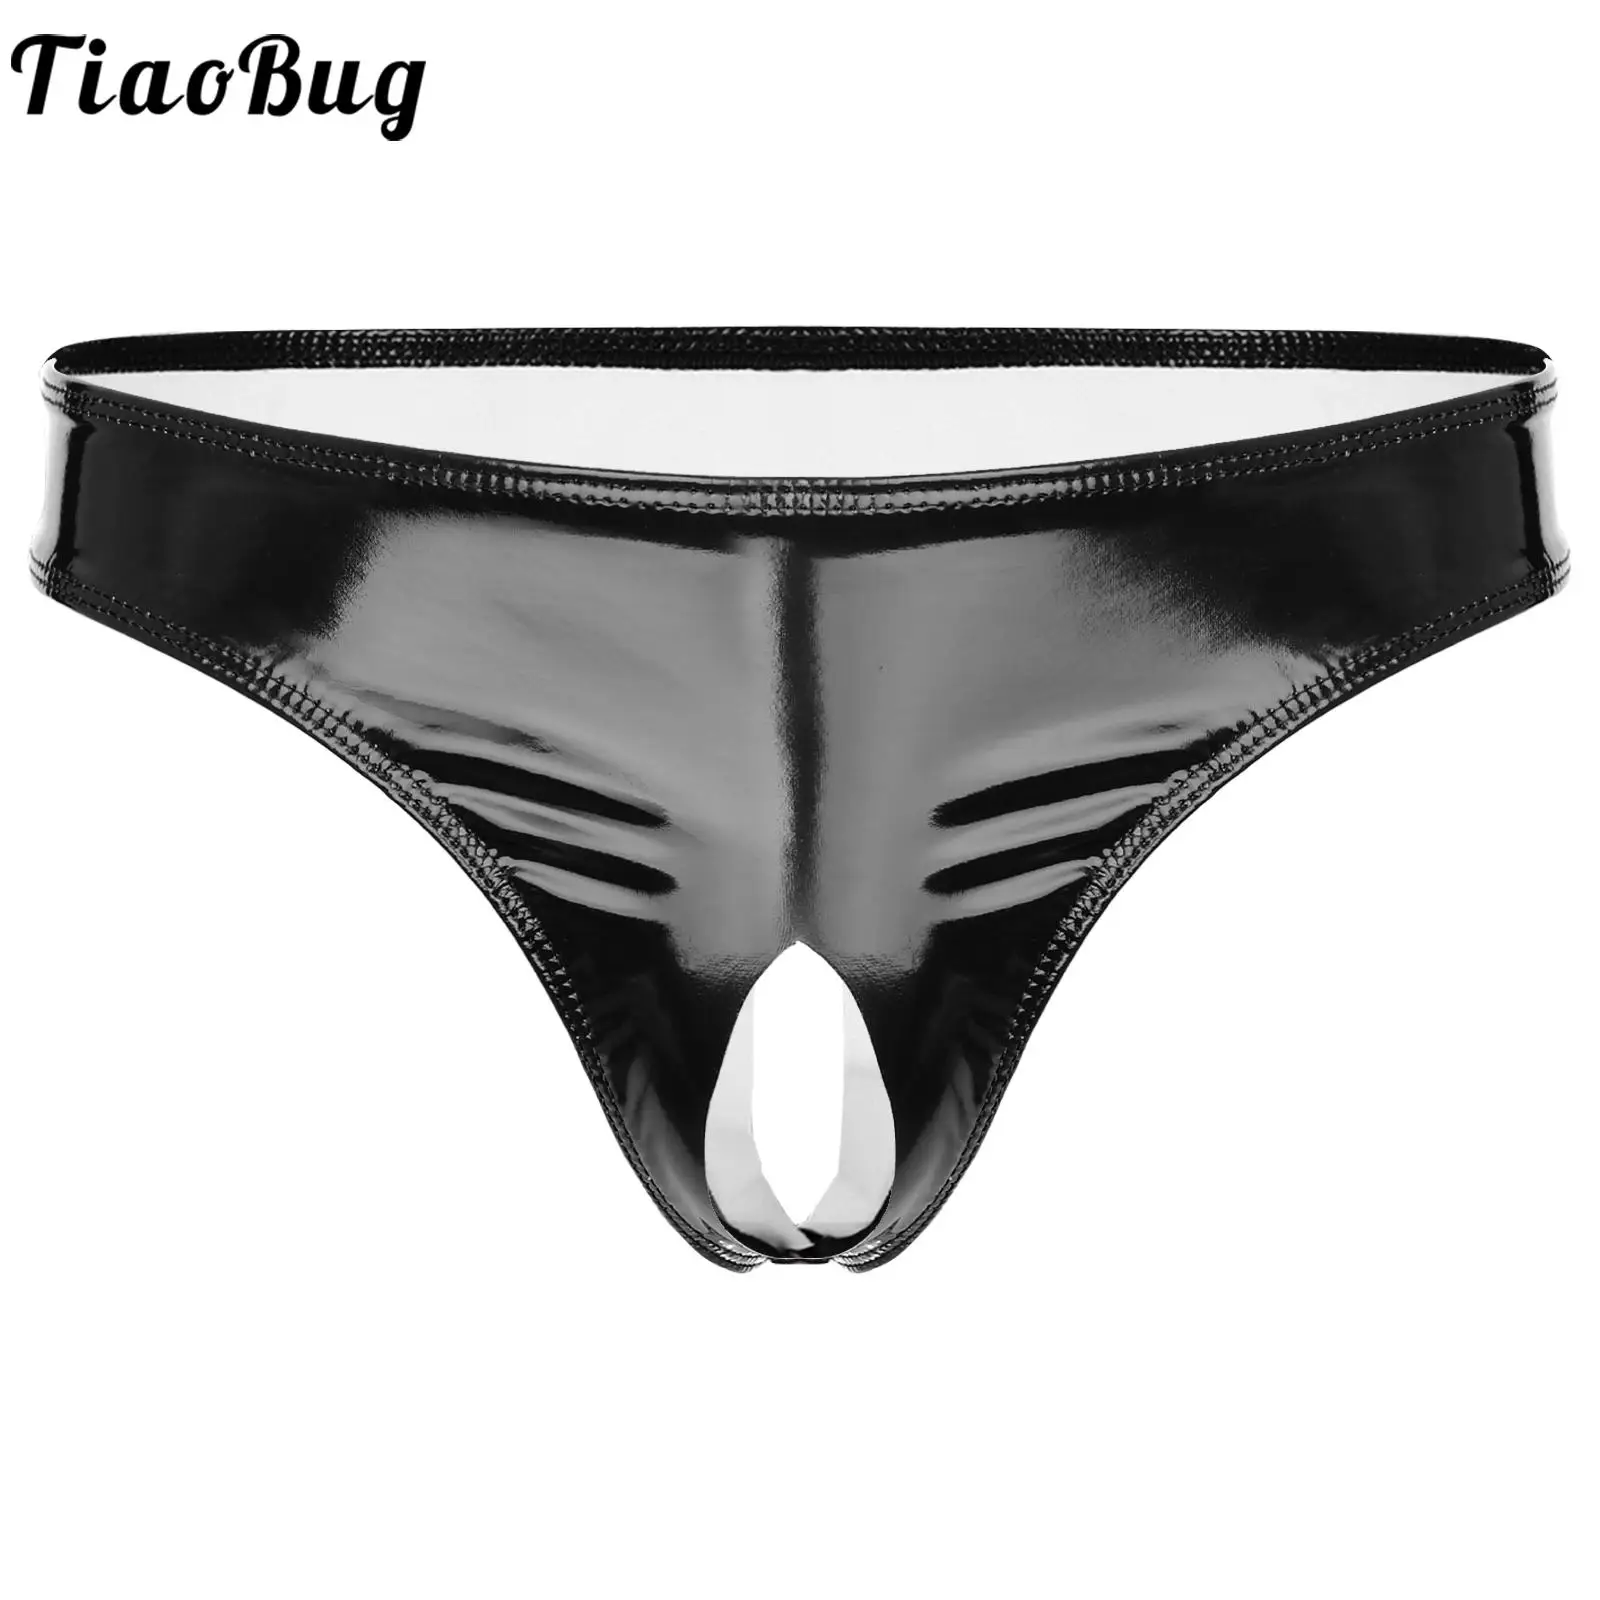 

Mens Latex Panties Wet Look Patent Leather Open Crotch Thong Low Rise High Cut Mini Briefs Underwear Club Performance Costume